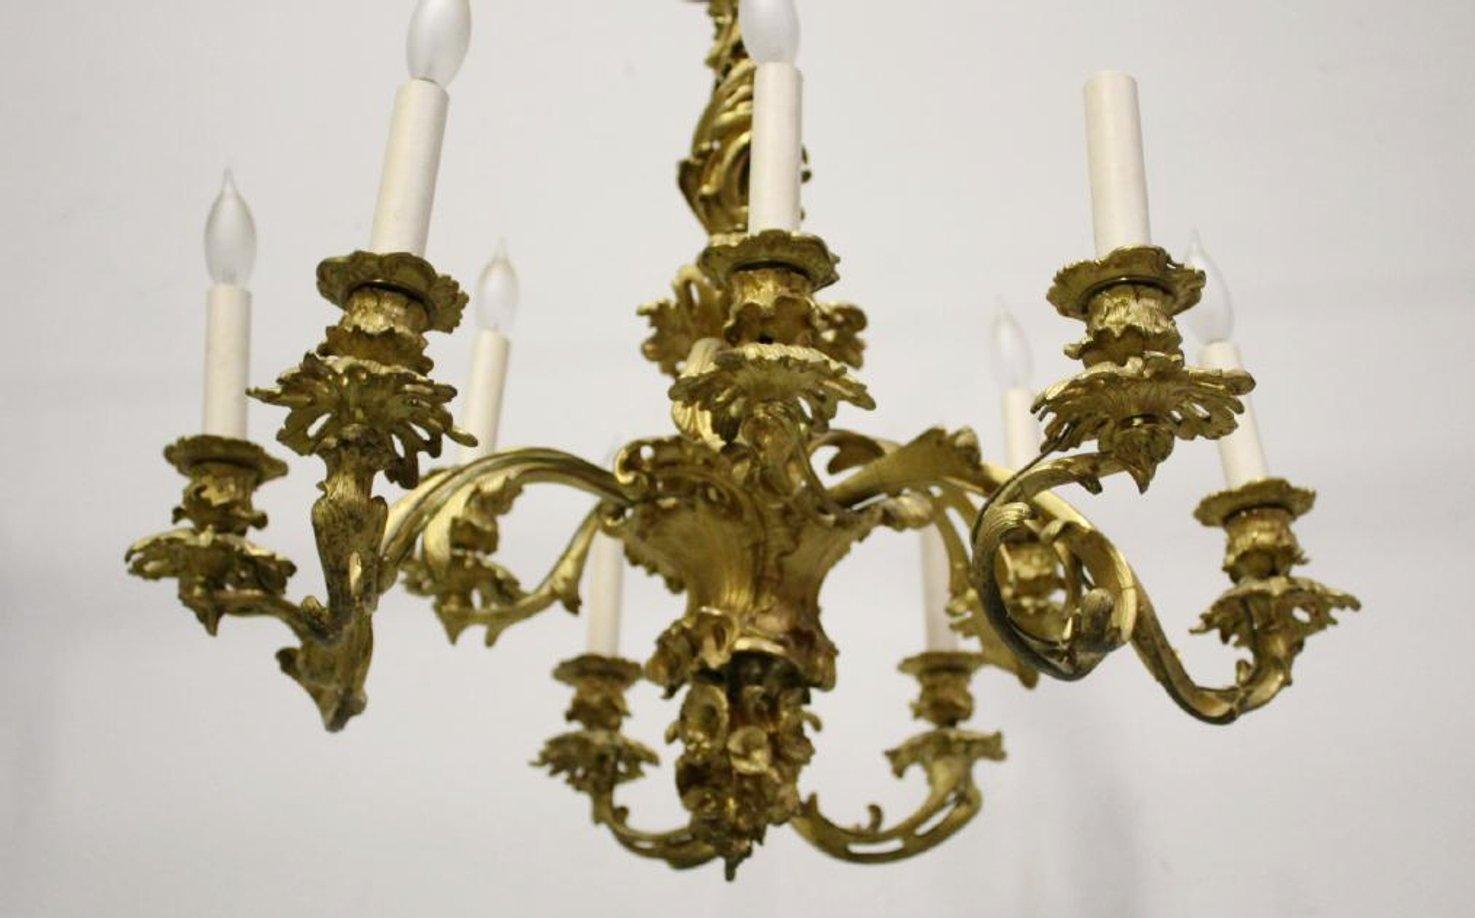 Elaborate 19cnetury Signed JD Louis XV style ormolu 9 light chandelier, meticulous attention has been given to every details.
including chain and canopy